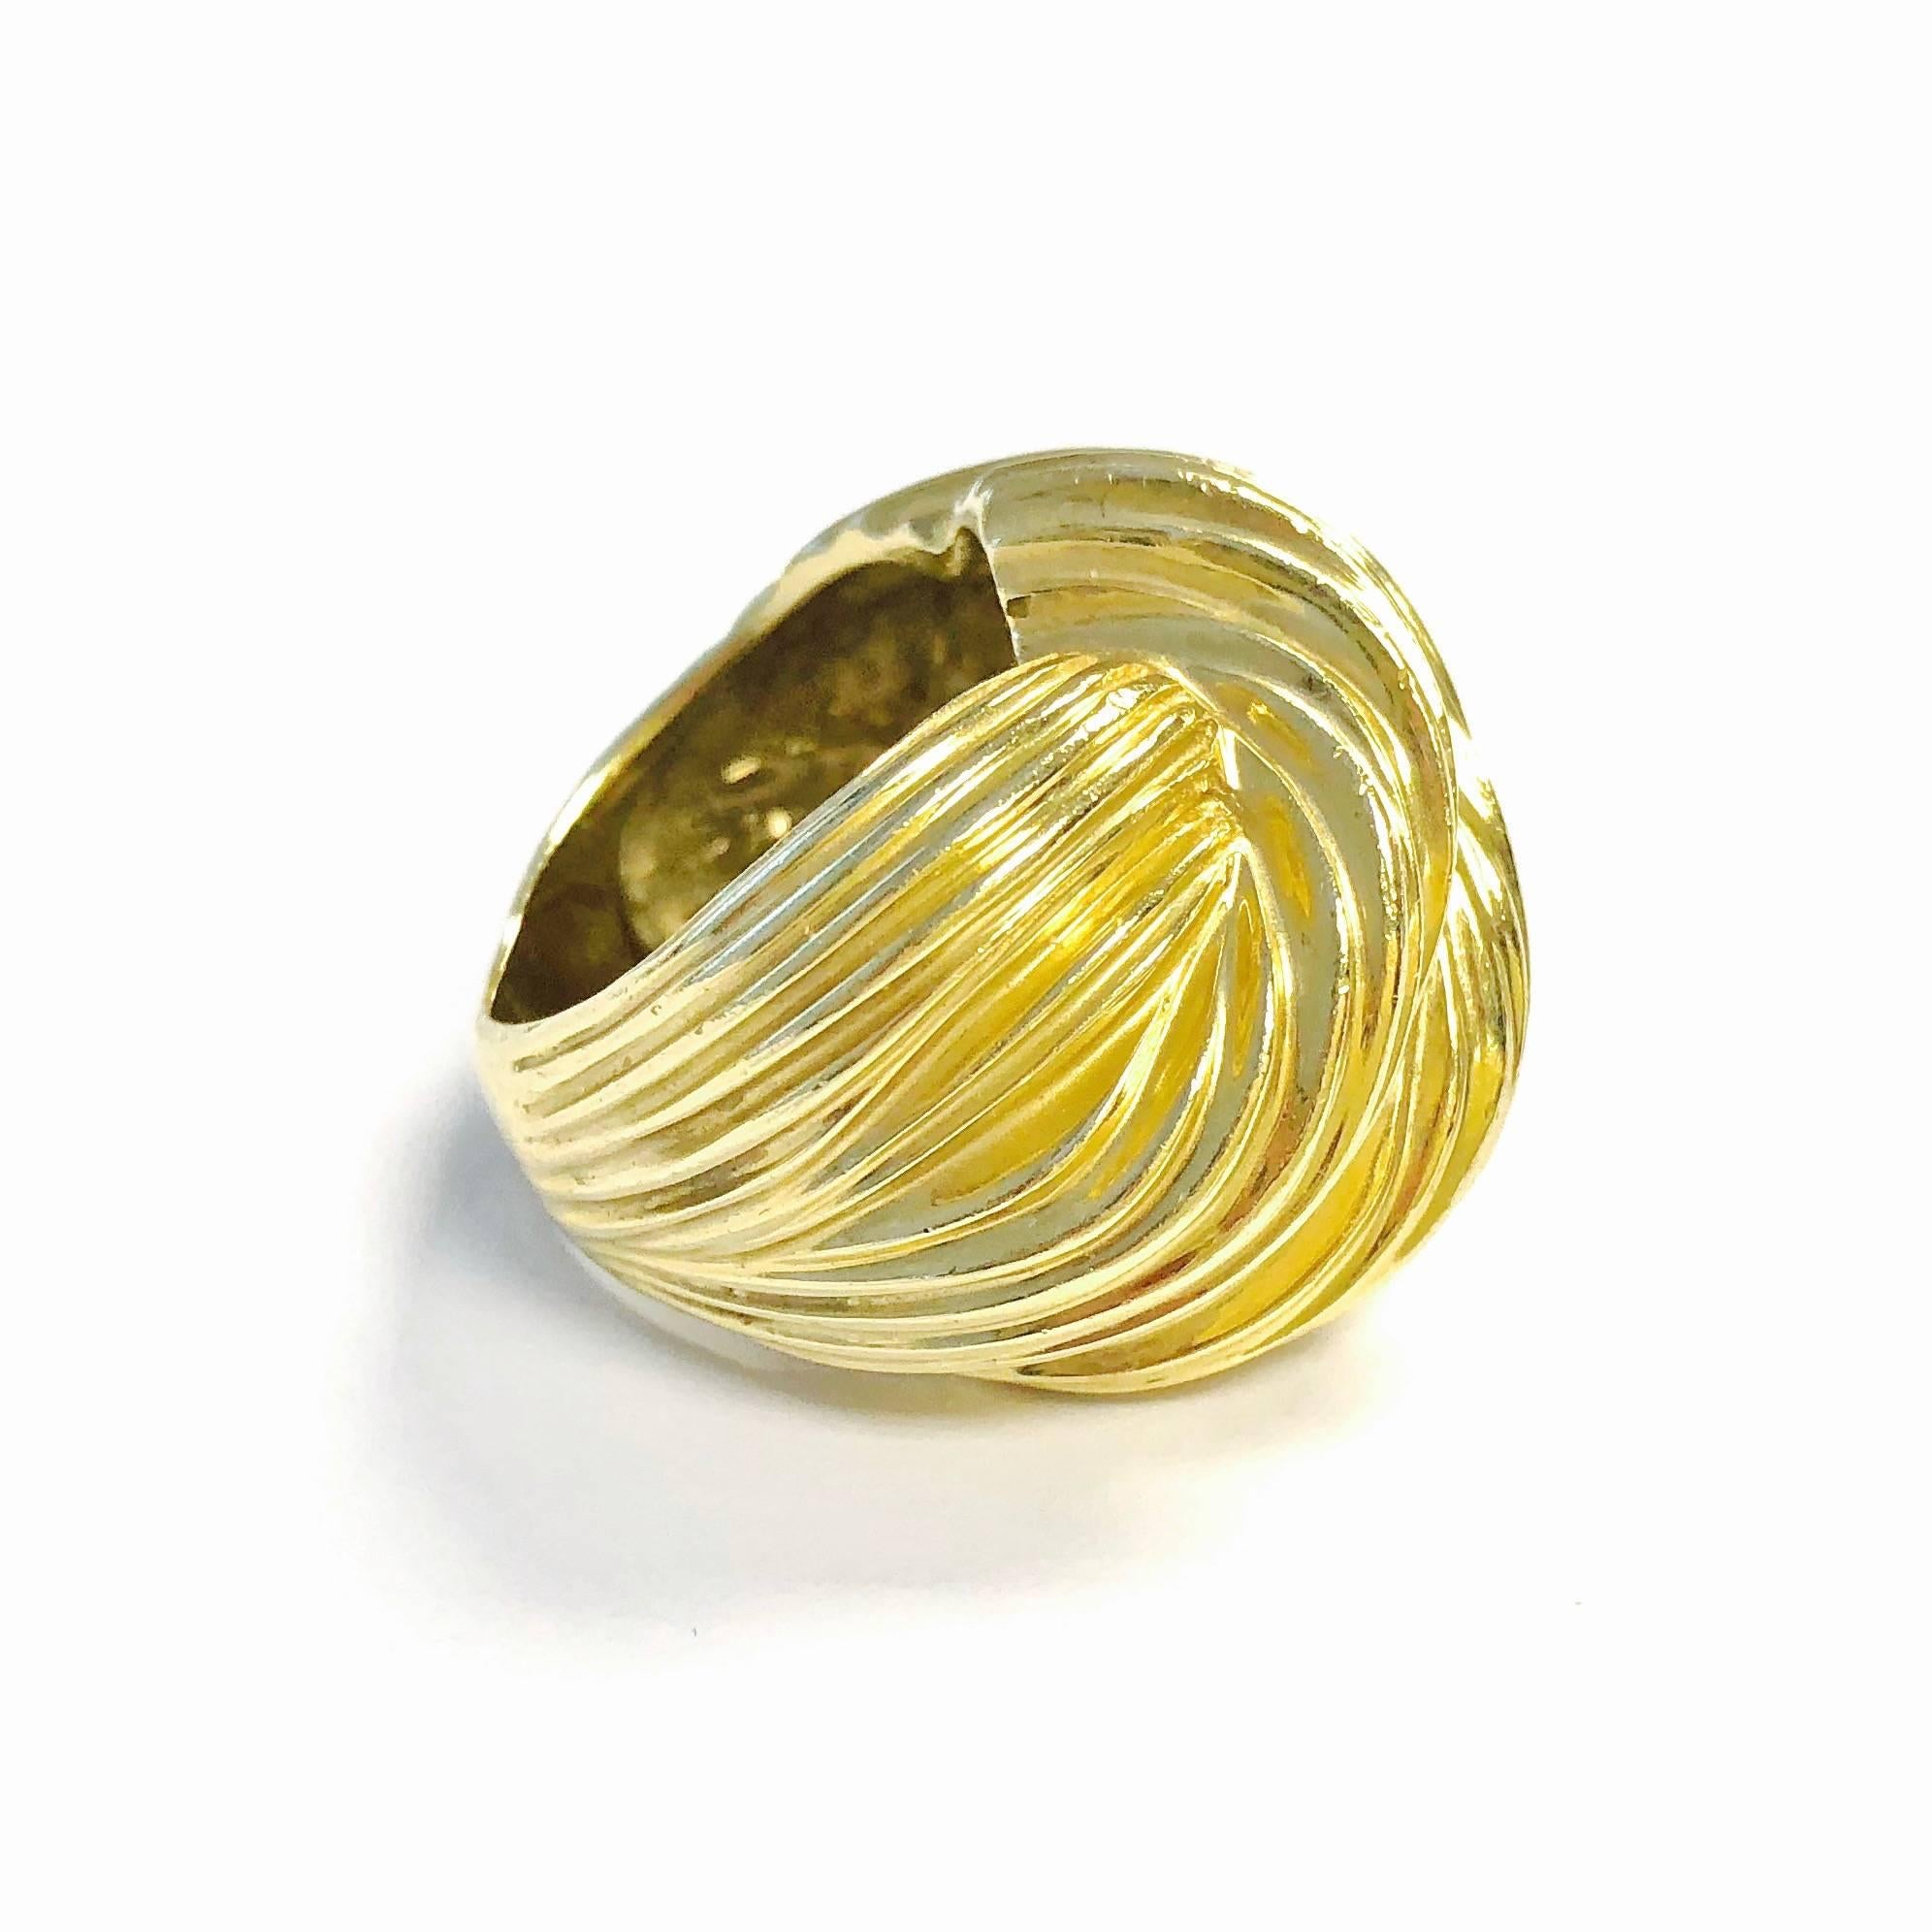 Rotkel 14K yellow gold large domed textured ribbons knot style ring.
Measurements: 
Front: 1 1/16 inch W x 13/16 inch H x 3/8 inch D
Weight: 17.9 grams
Size: 6.5 (Sizable)
Marked: Rotkel 14K Made in USA
